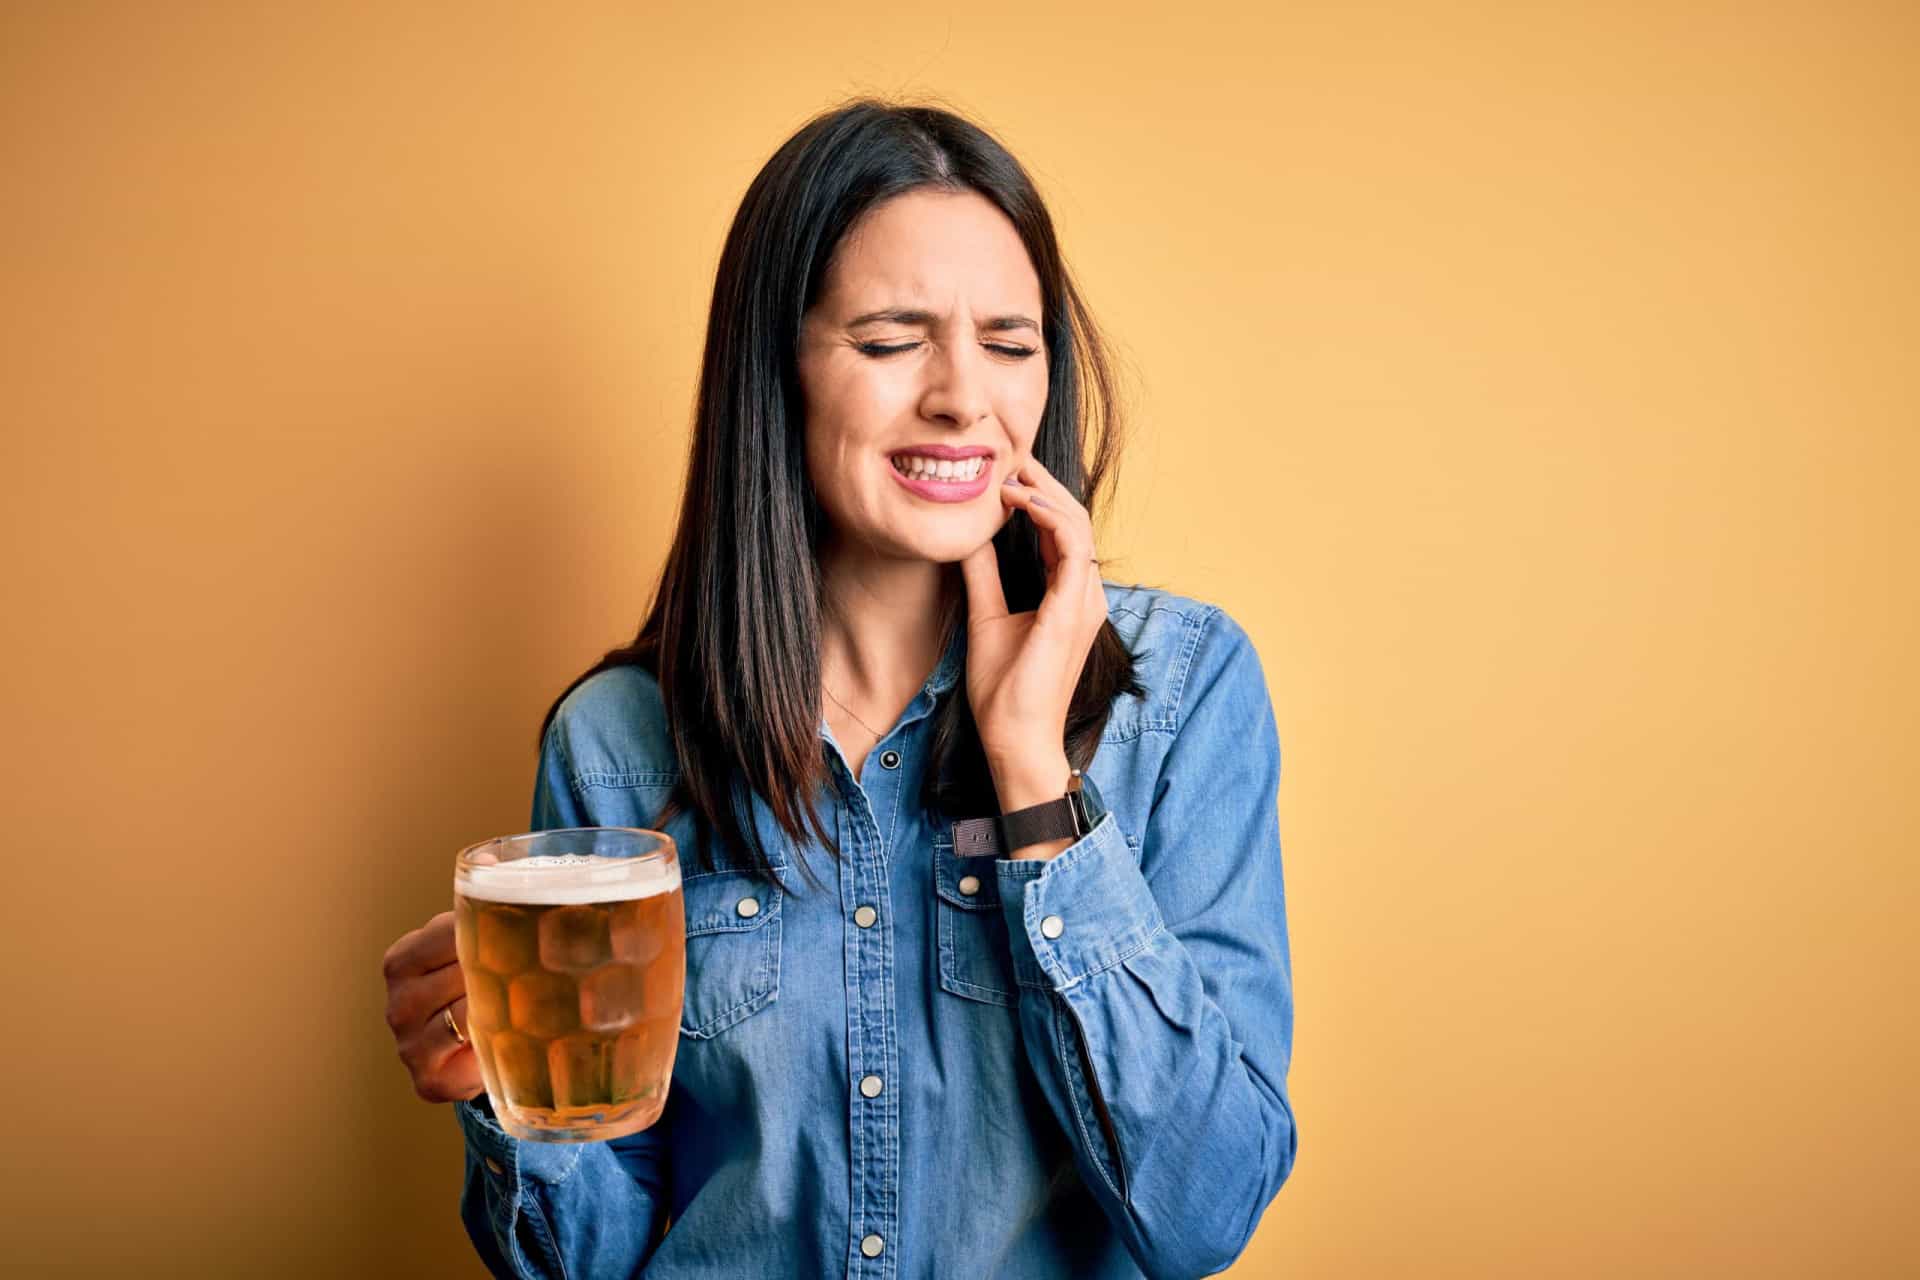 <p>Some people just have a drink and don’t think much of it, while others do so because it helps with the nerves of sitting in a dentist’s chair. Either way, alcohol should be avoided because it can interact with dental medication.</p><p>You may also like:<a href="https://www.starsinsider.com/n/348351?utm_source=msn.com&utm_medium=display&utm_campaign=referral_description&utm_content=516746en-en"> Reality TV secrets that producers won't tell you</a></p>